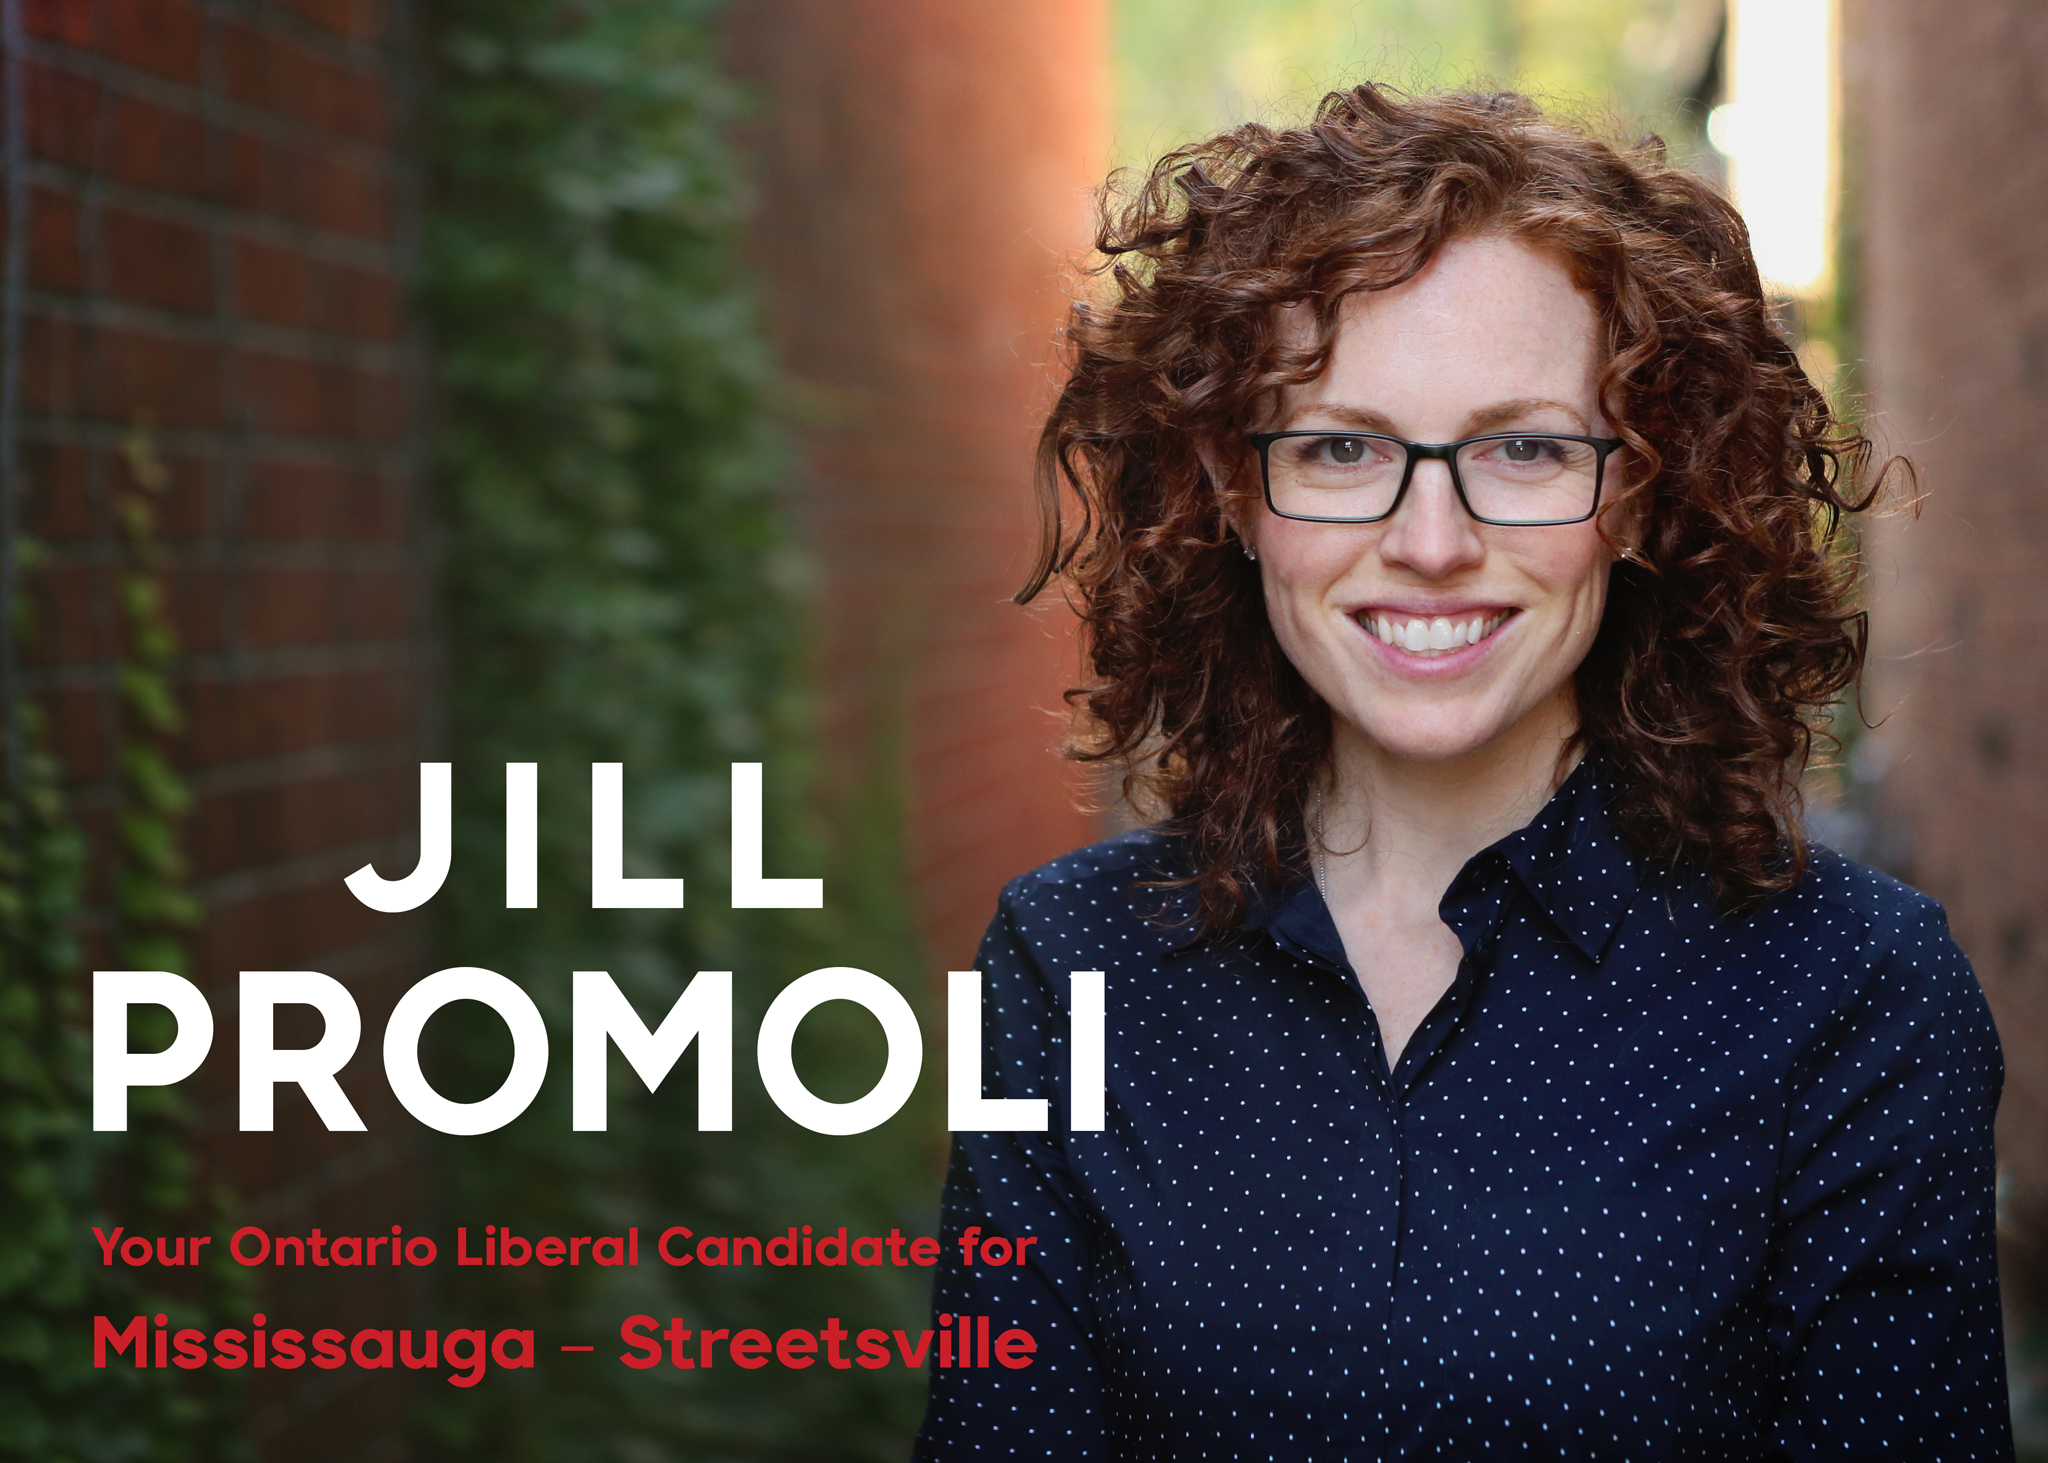 Jill Promoli - Your Ontario Liberal Candidate for Mississauga-Streetsville